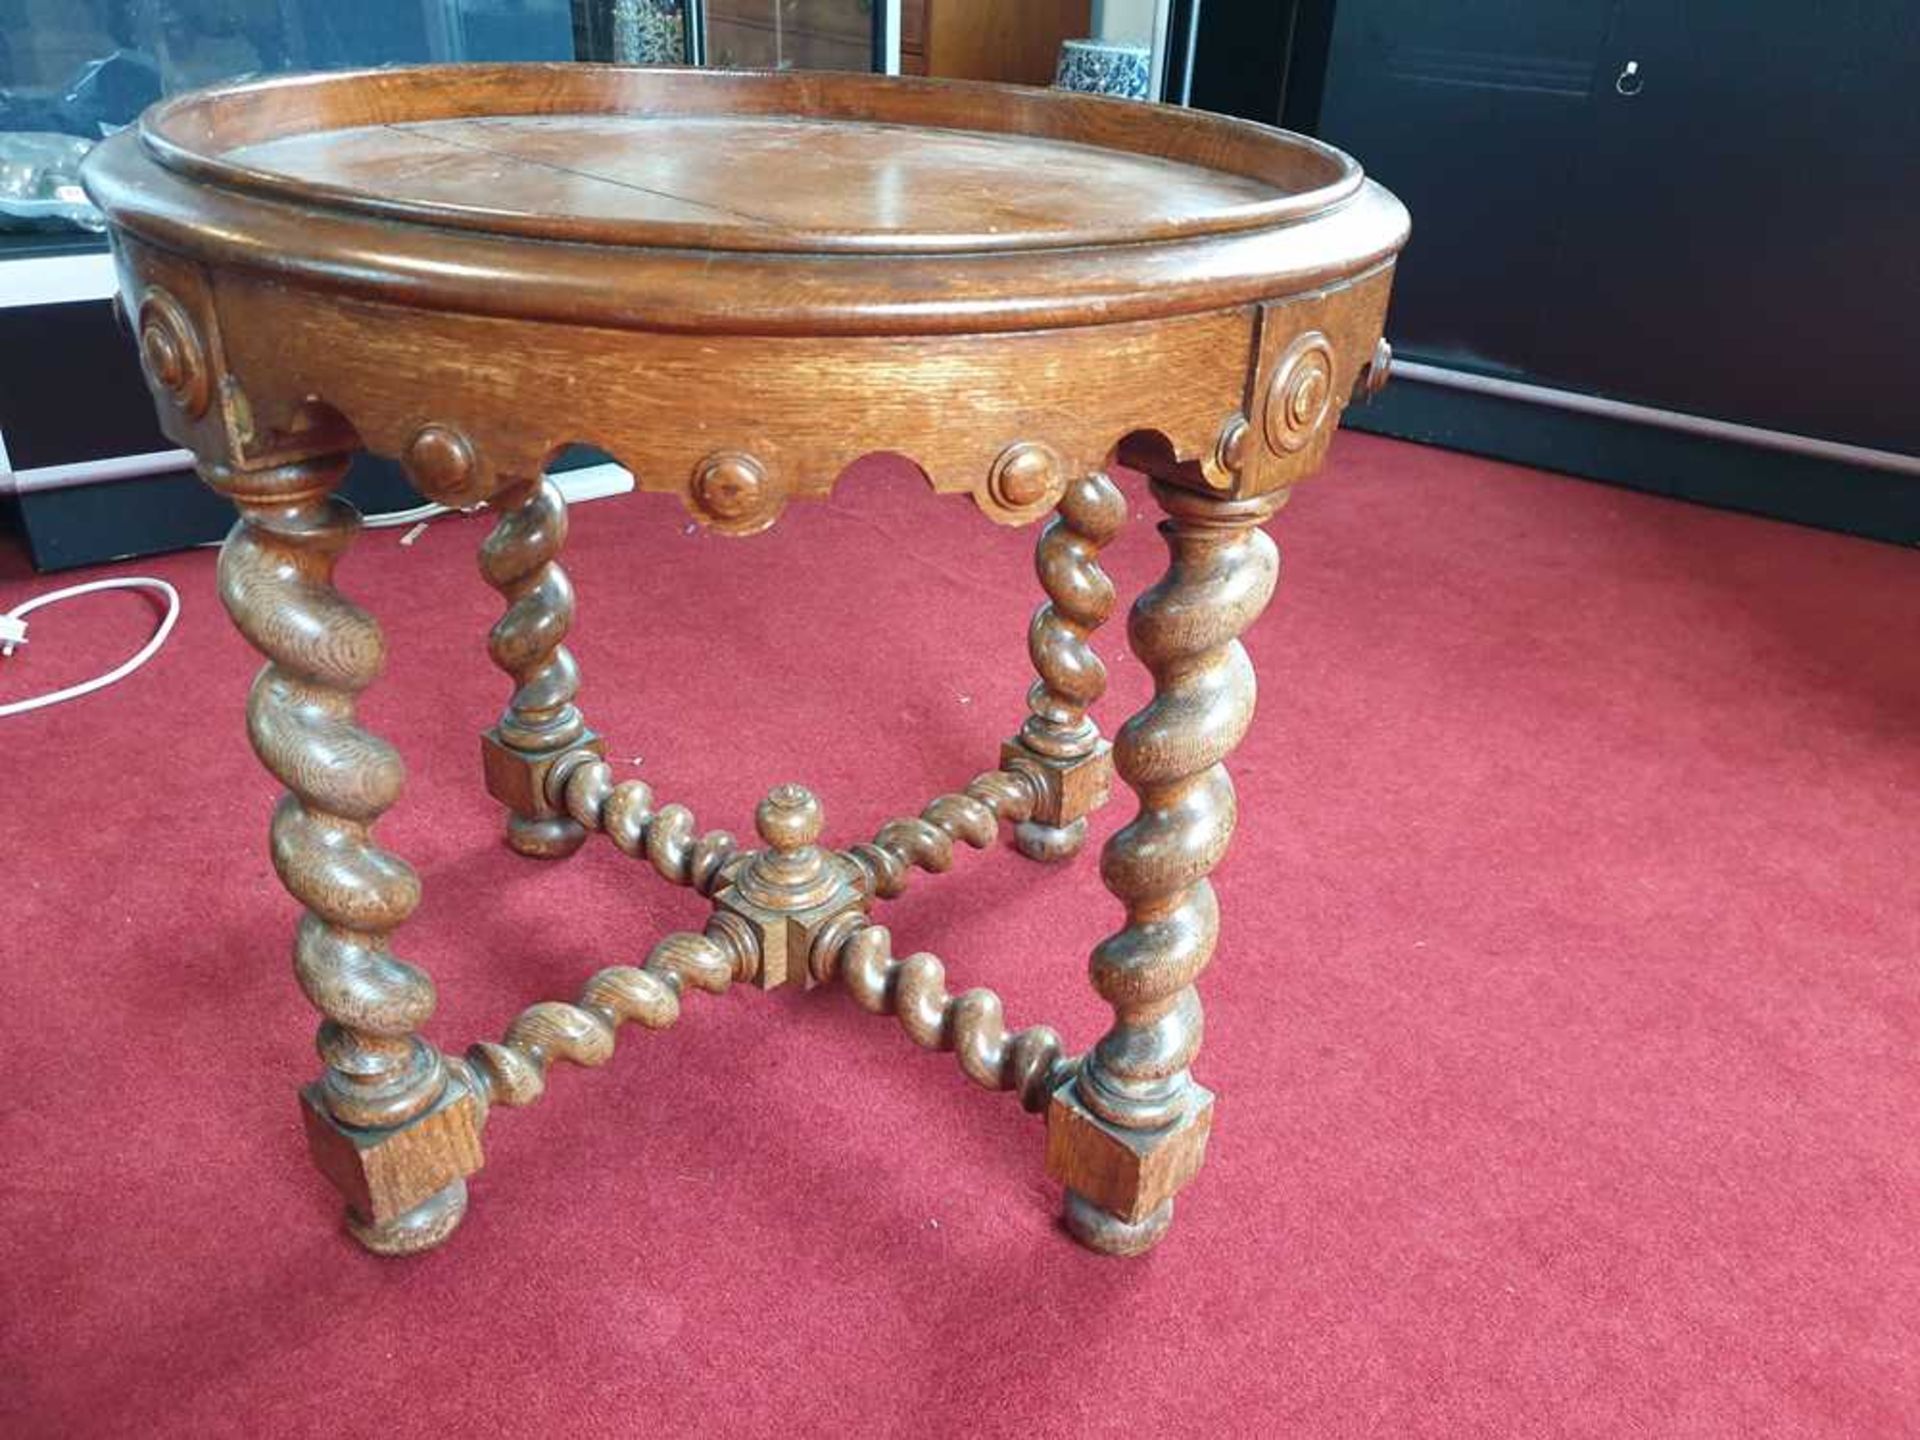 A JACOBEAN REVIVAL OAK OCCASIONAL TABLE EARLY 20TH CENTURY - Image 9 of 10